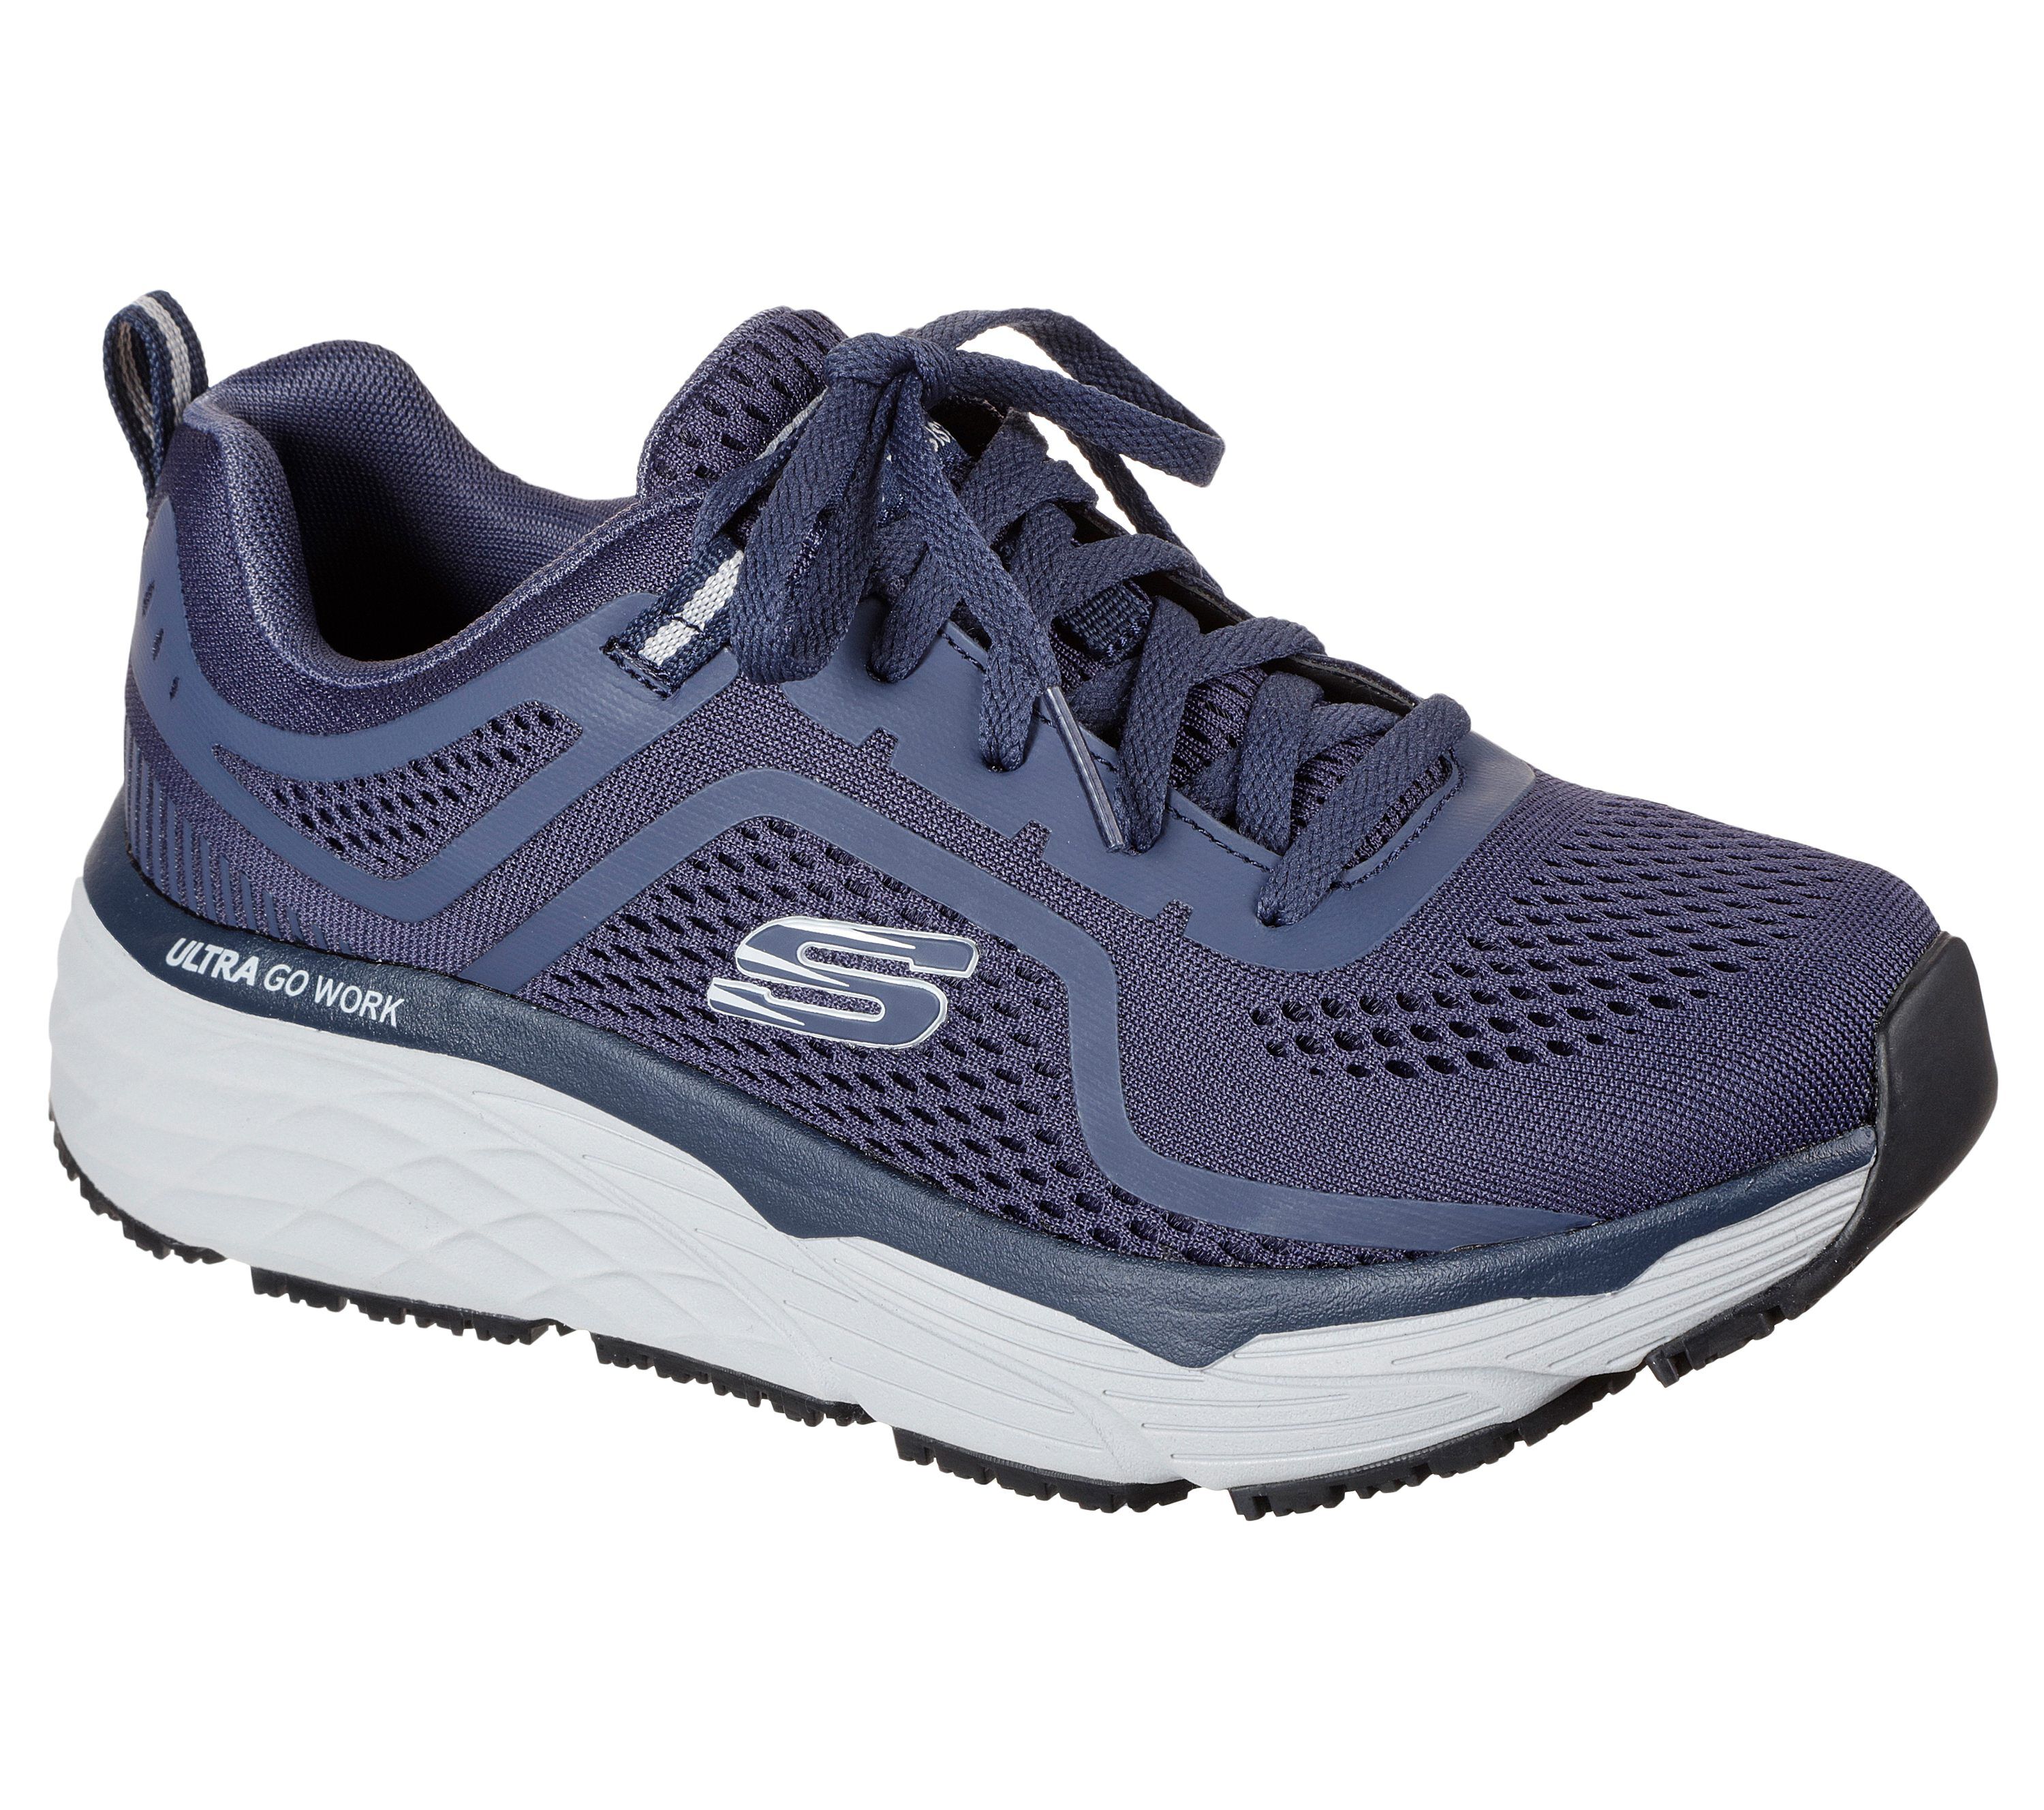 skechers security shoes